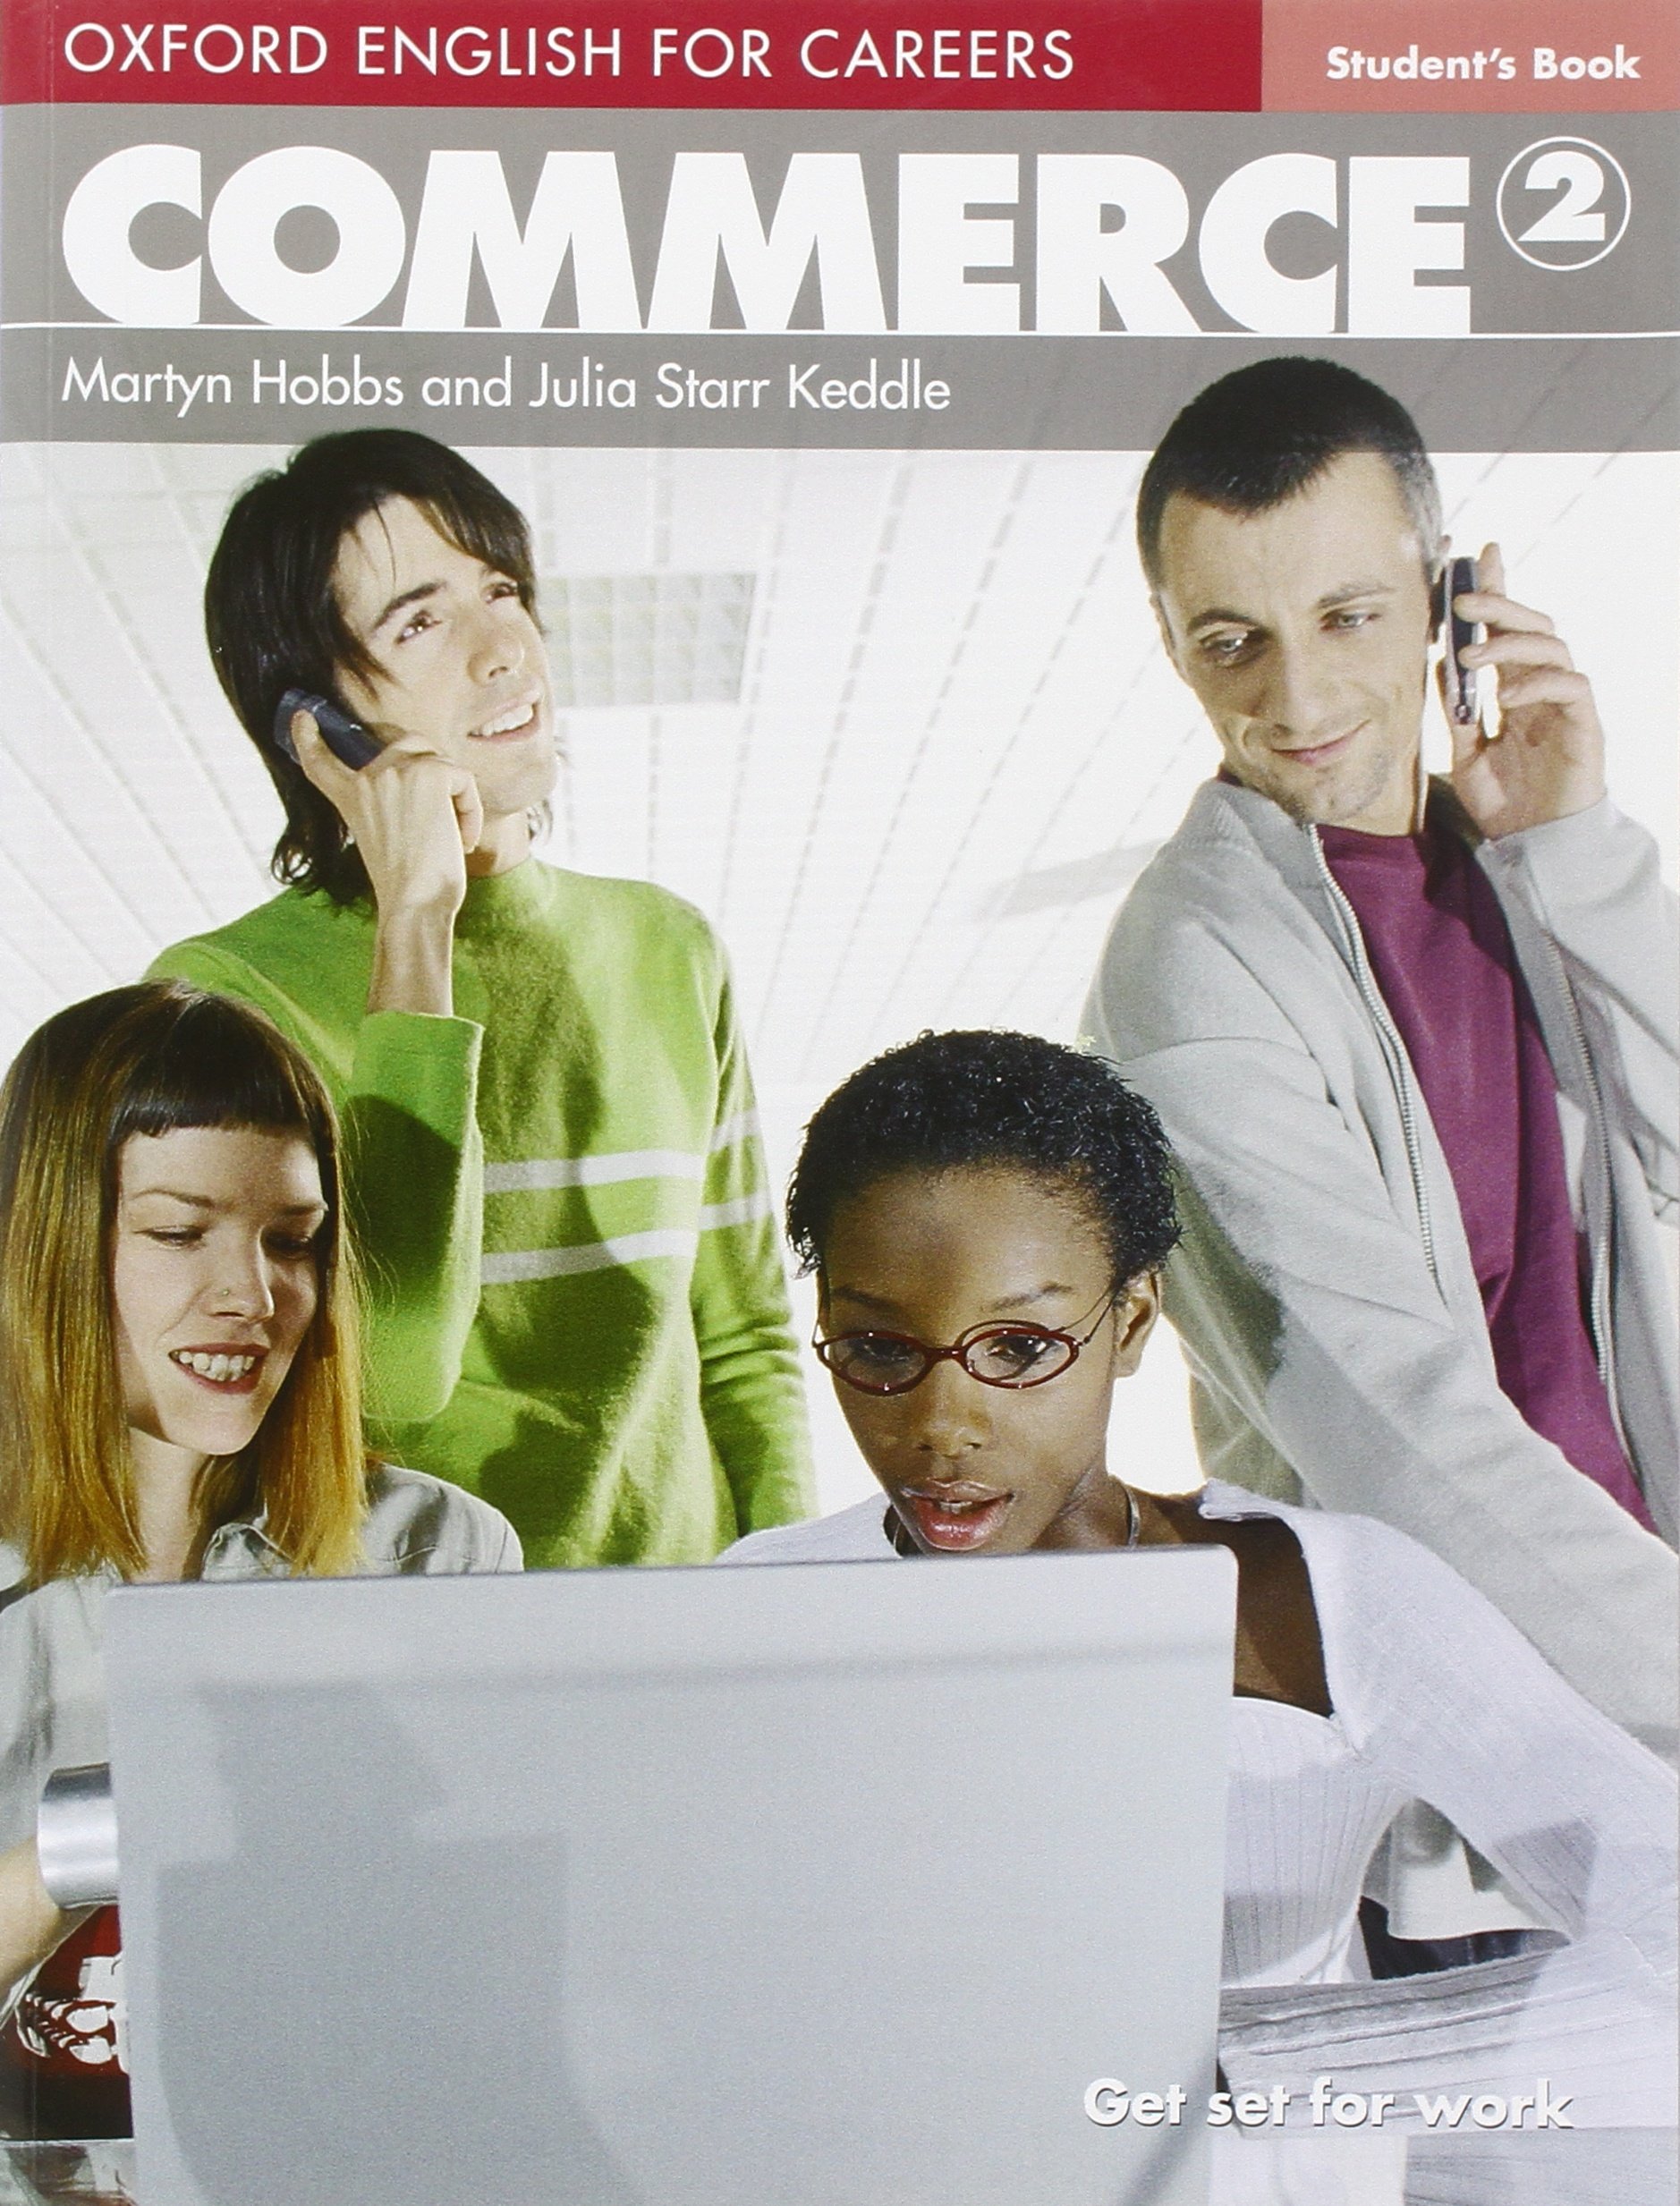 COMMERCE  (OXFORD ENGLISH FOR CAREERS)  2 Student's Book